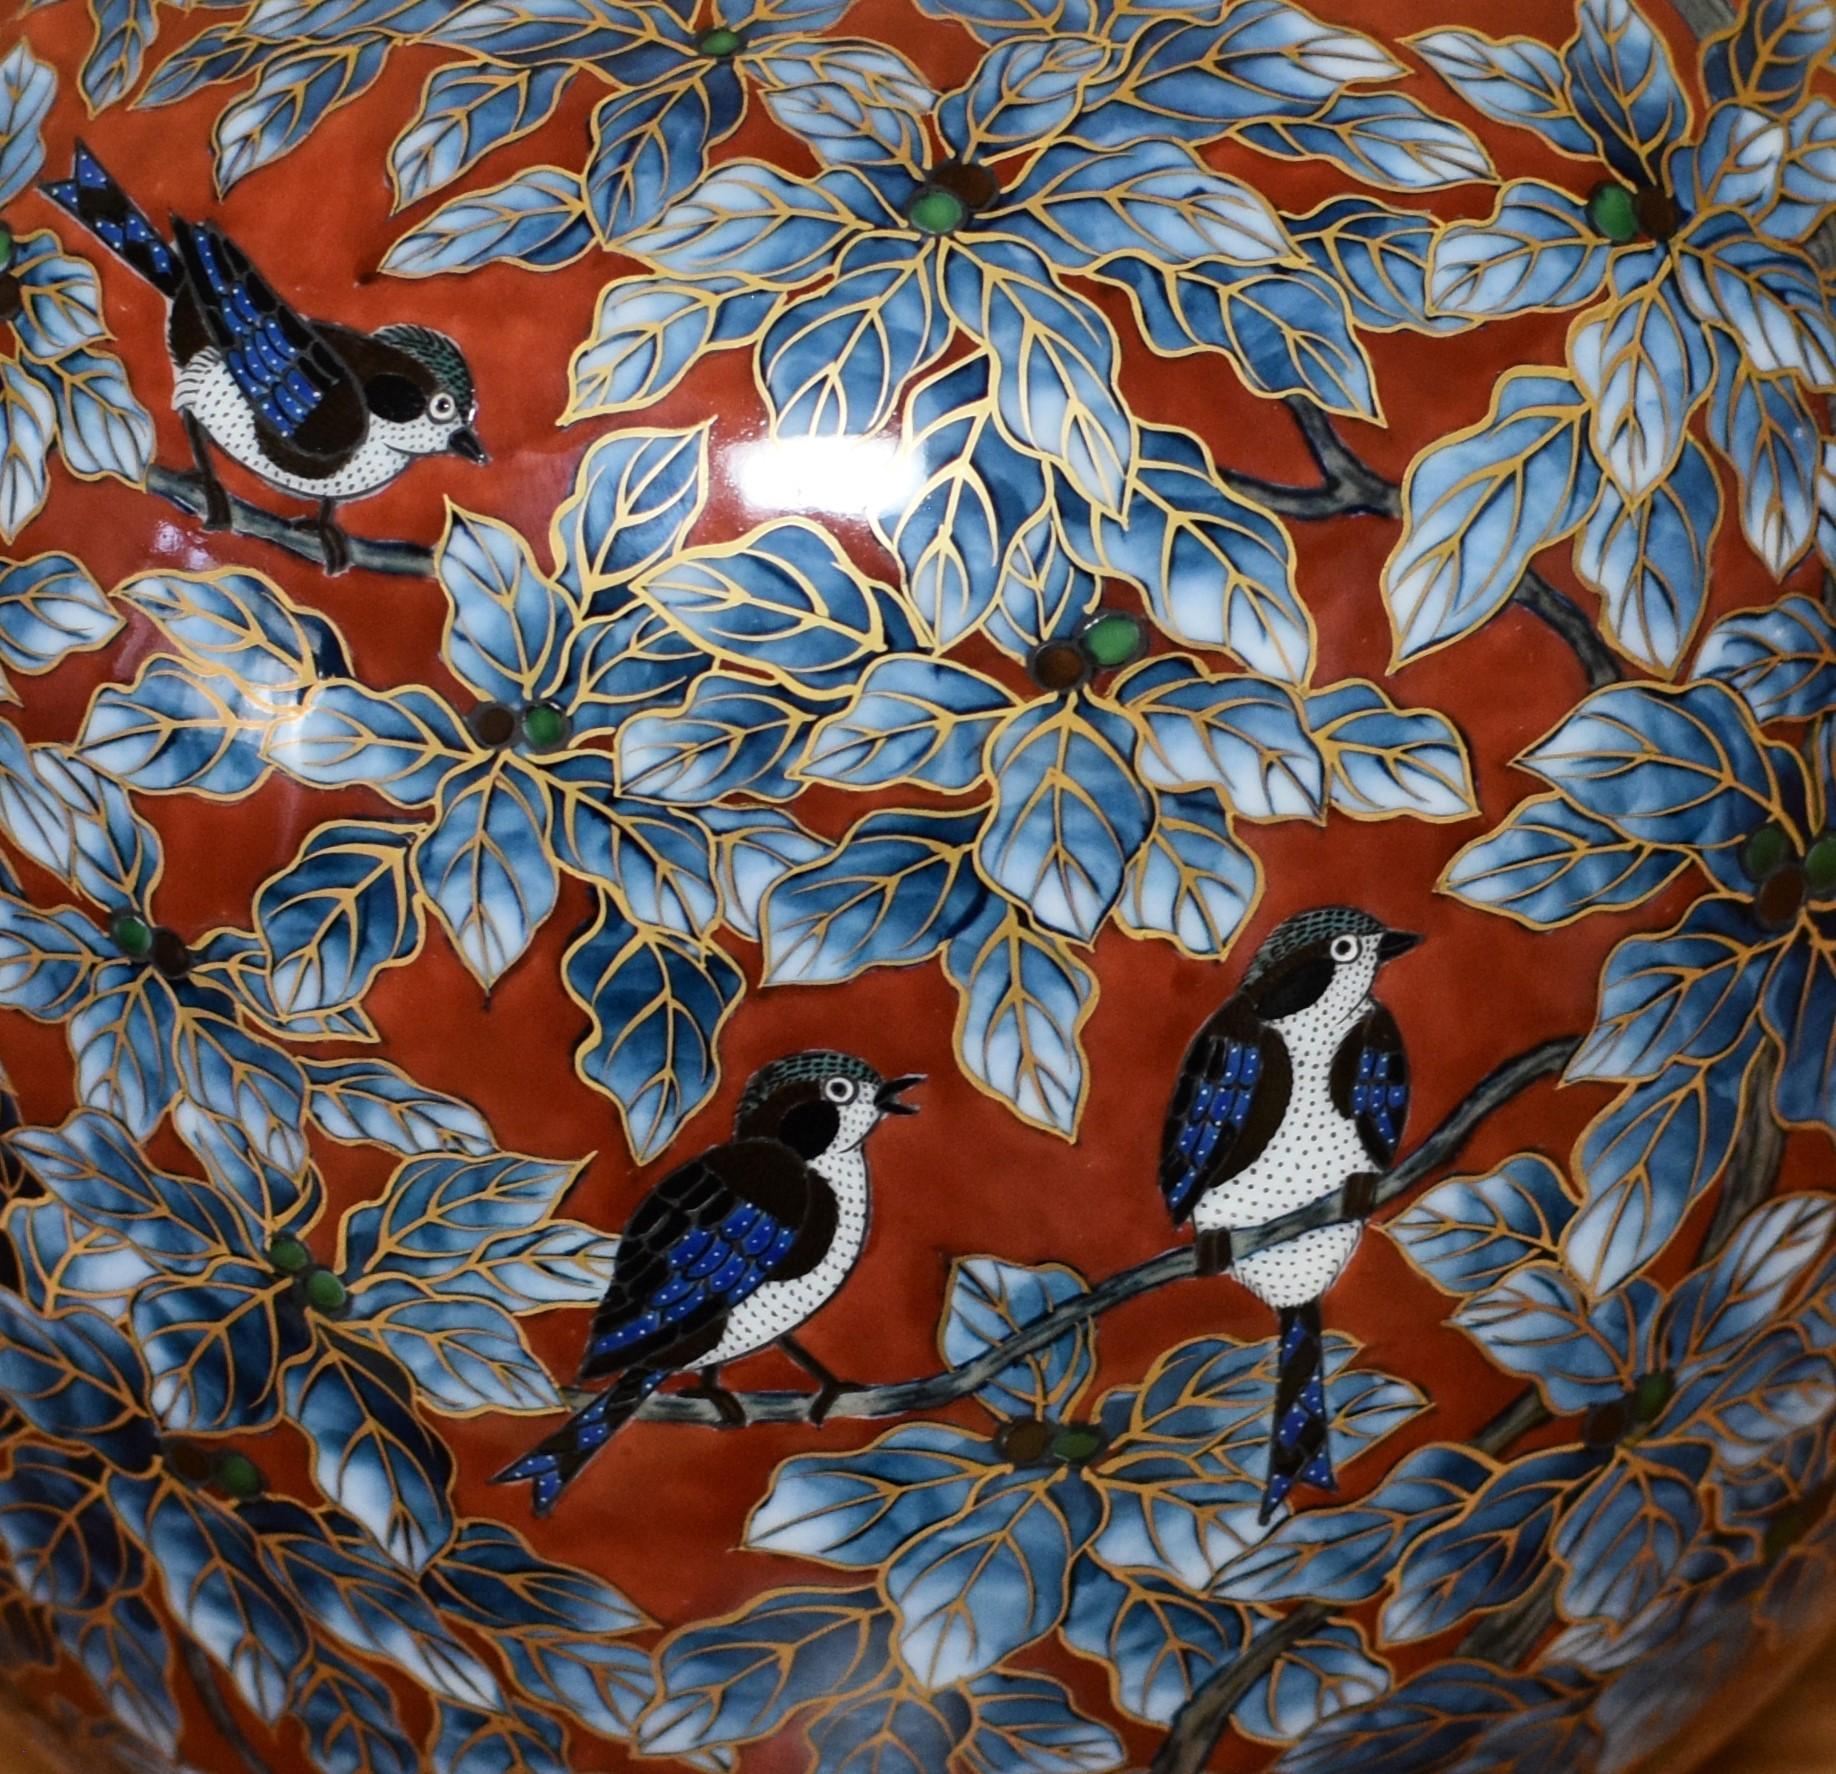 Exquisite Japanese contemporary decorative porcelain vase, painstakingly intricately gilded and hand painted in stunning blue, white and red on a beautiful globular body, a signed masterpiece by award-winning second-generation master porcelain